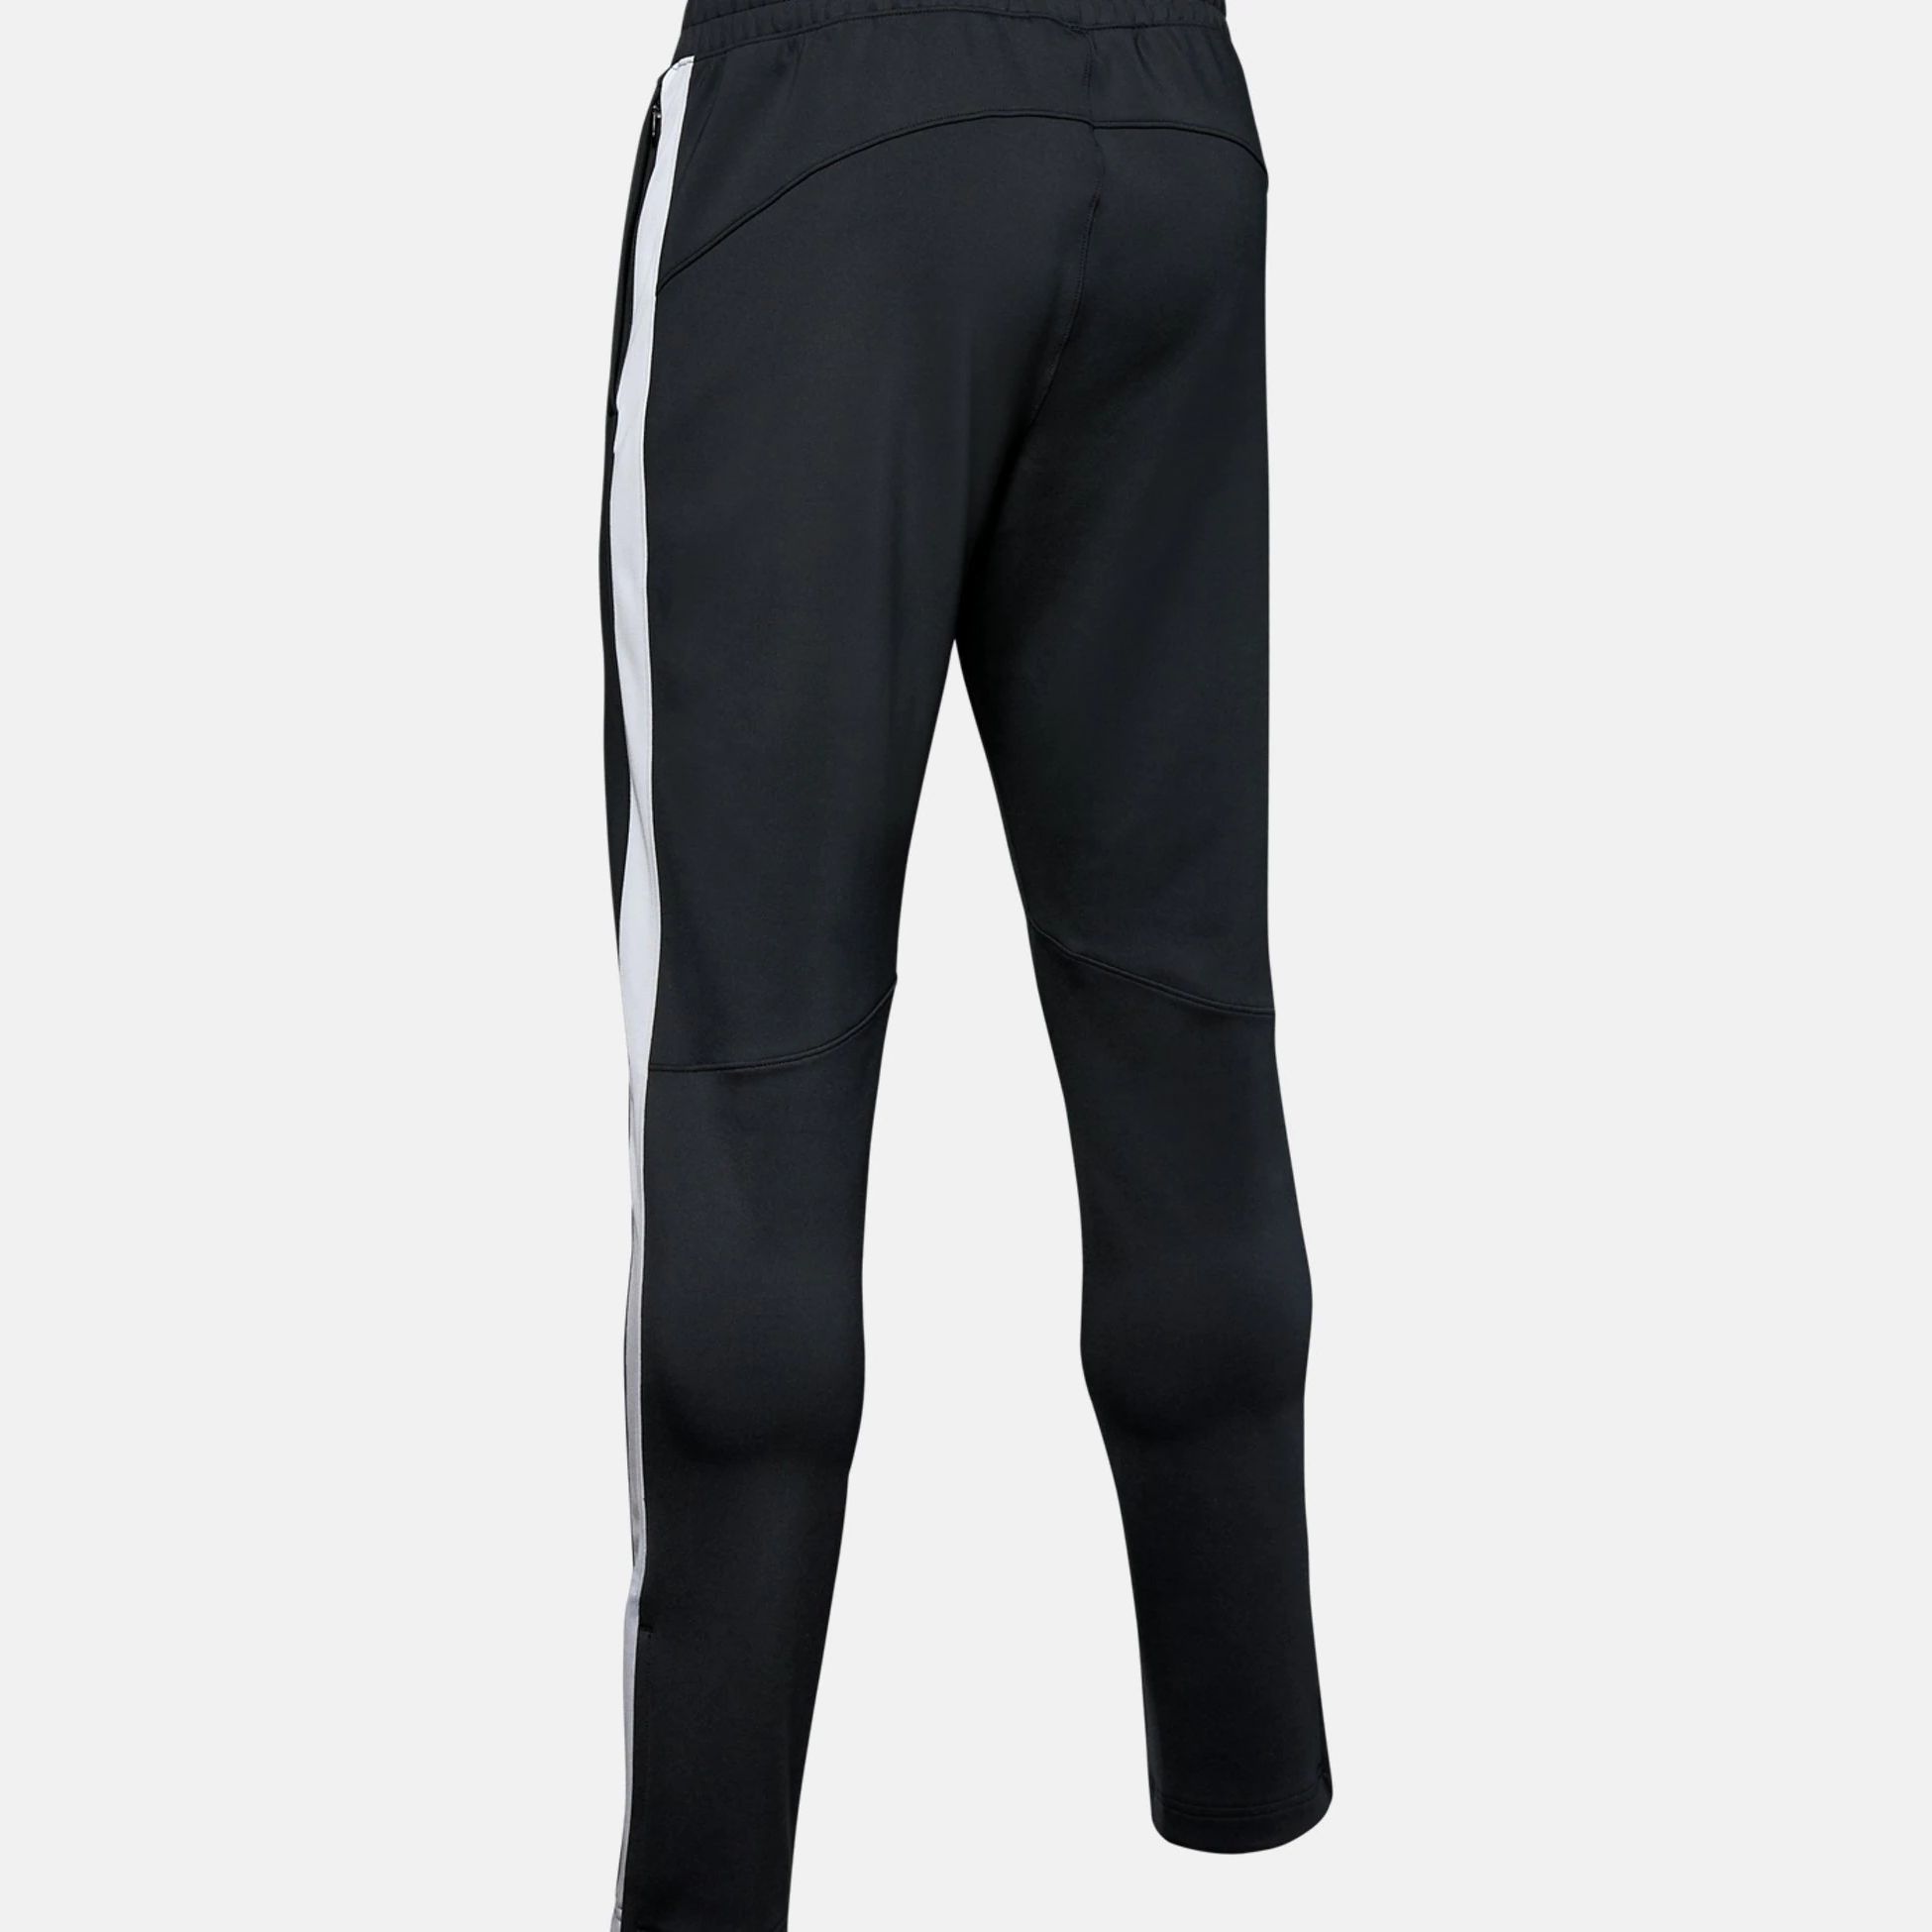 Joggers Pants & Clothing Project Under Sweatpants armour | Track Rock 7262 |